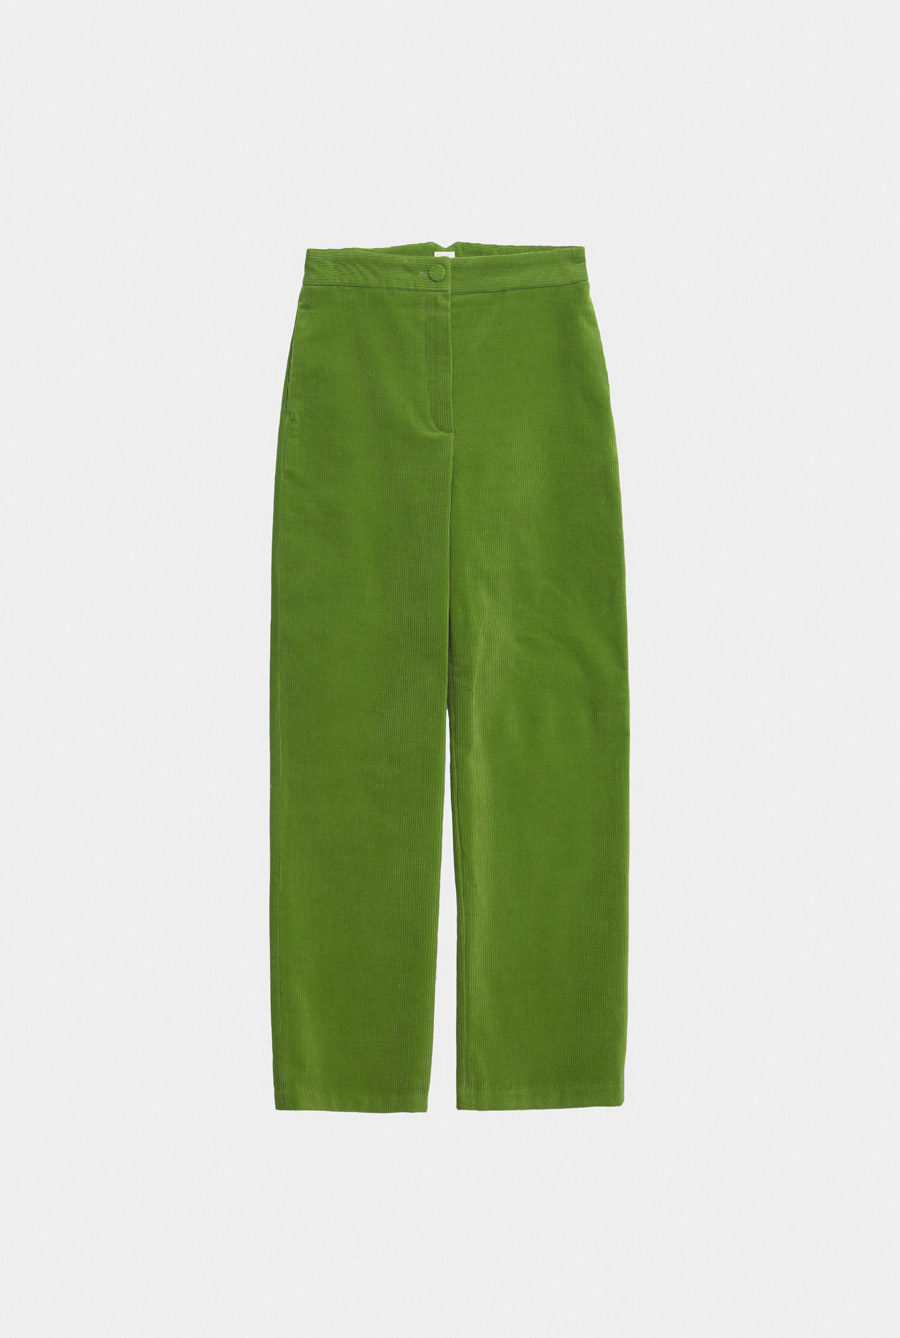 [H8 EXCLUSIVE] HOLIDAY PANTS (GRASS GREEN)